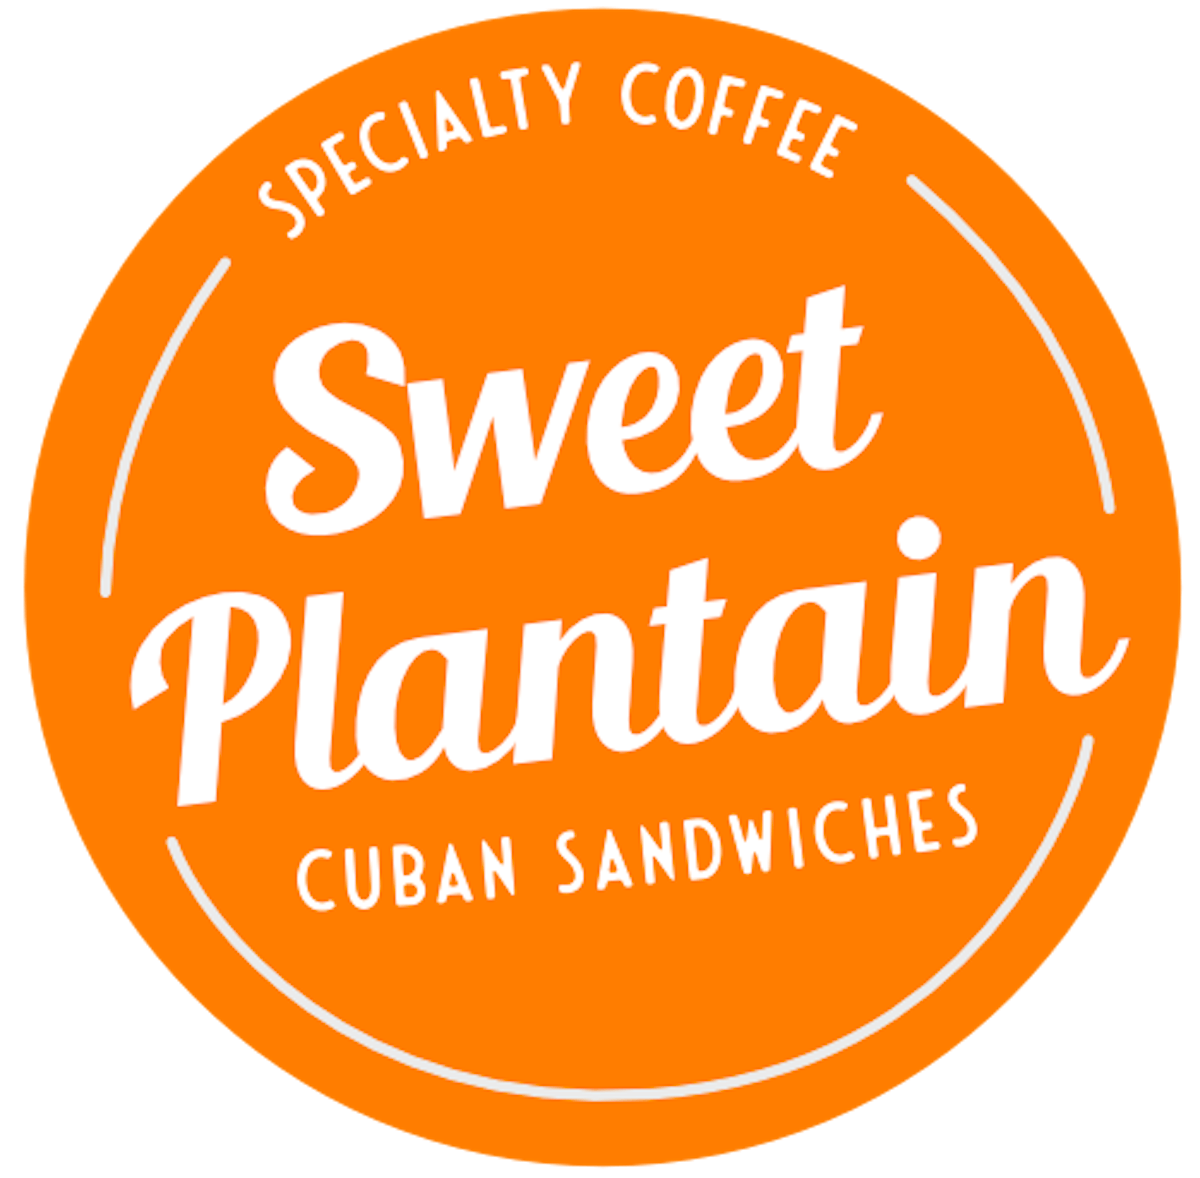 Specialty Coffee and Cuban sandwich in Asheville